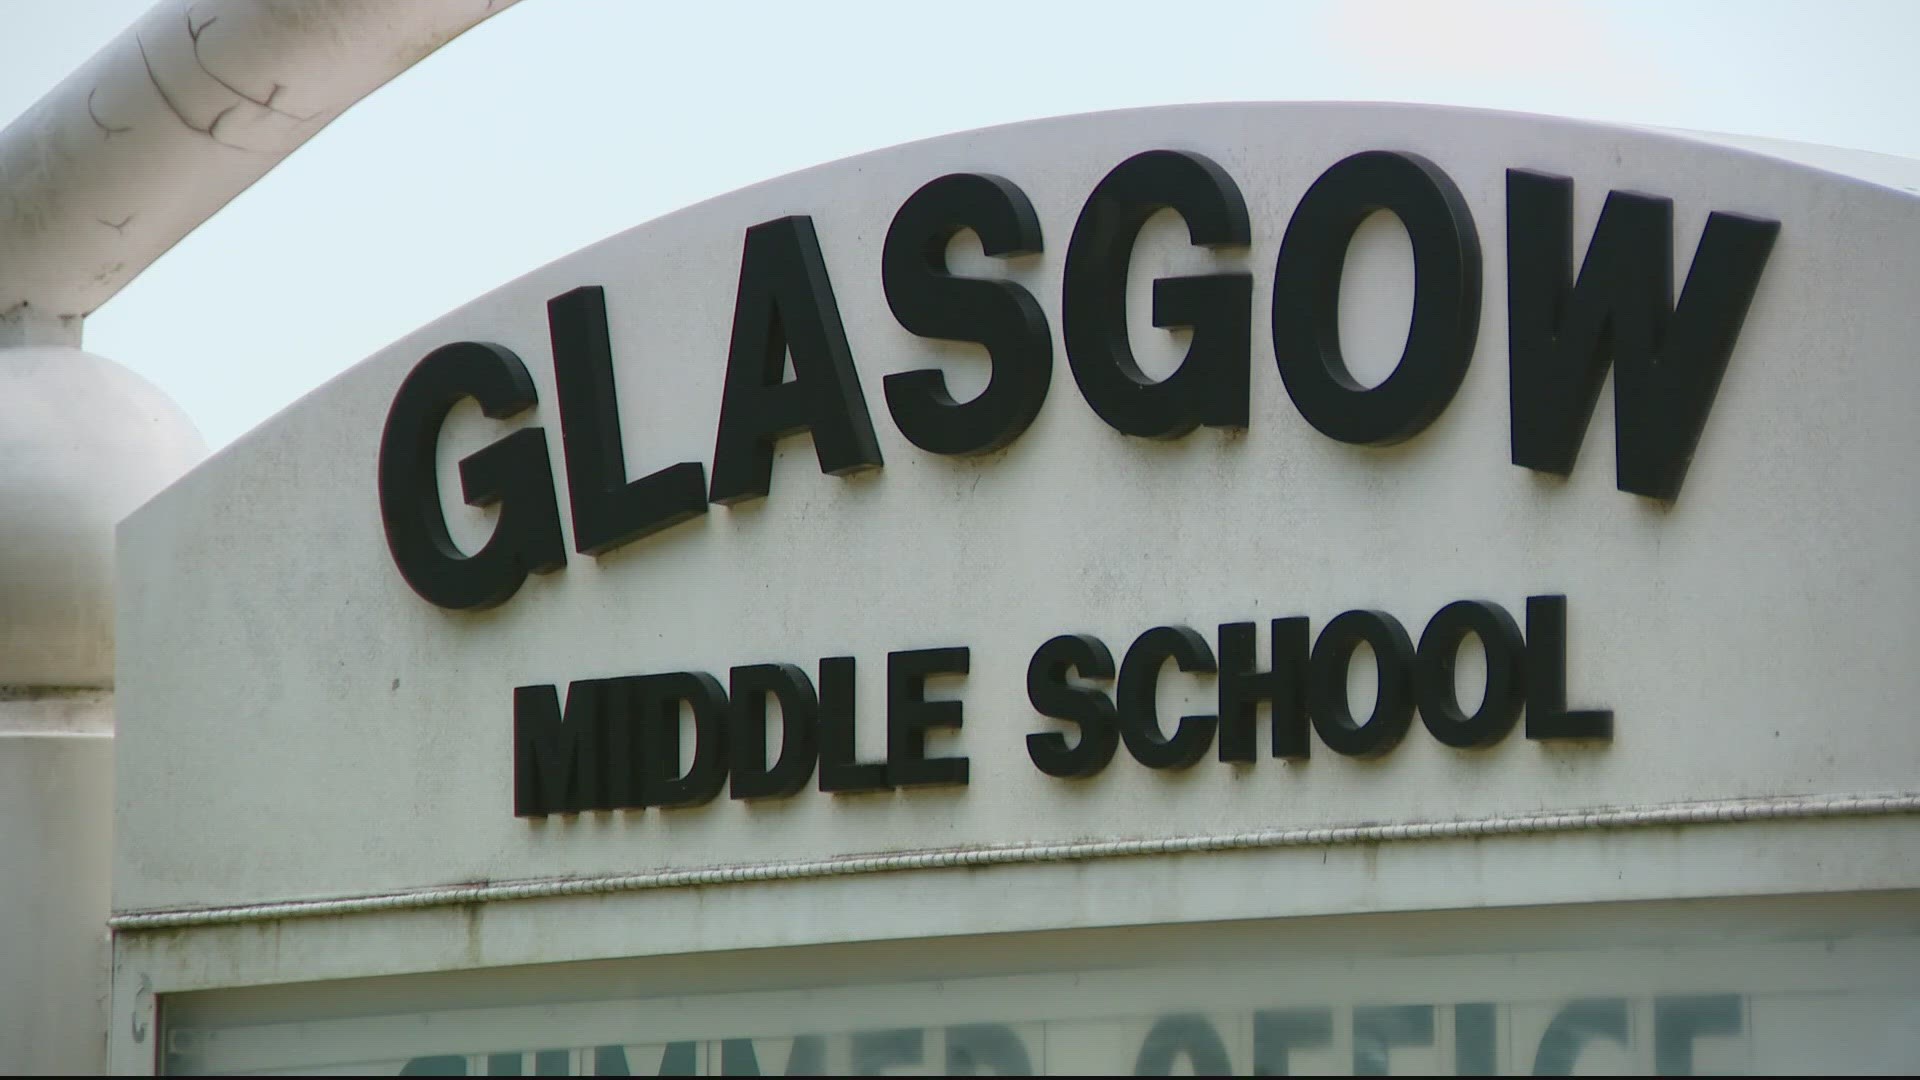 Glasgow middle school will see increased security and police presence at their school after rumors of someone potentially bringing a gun.